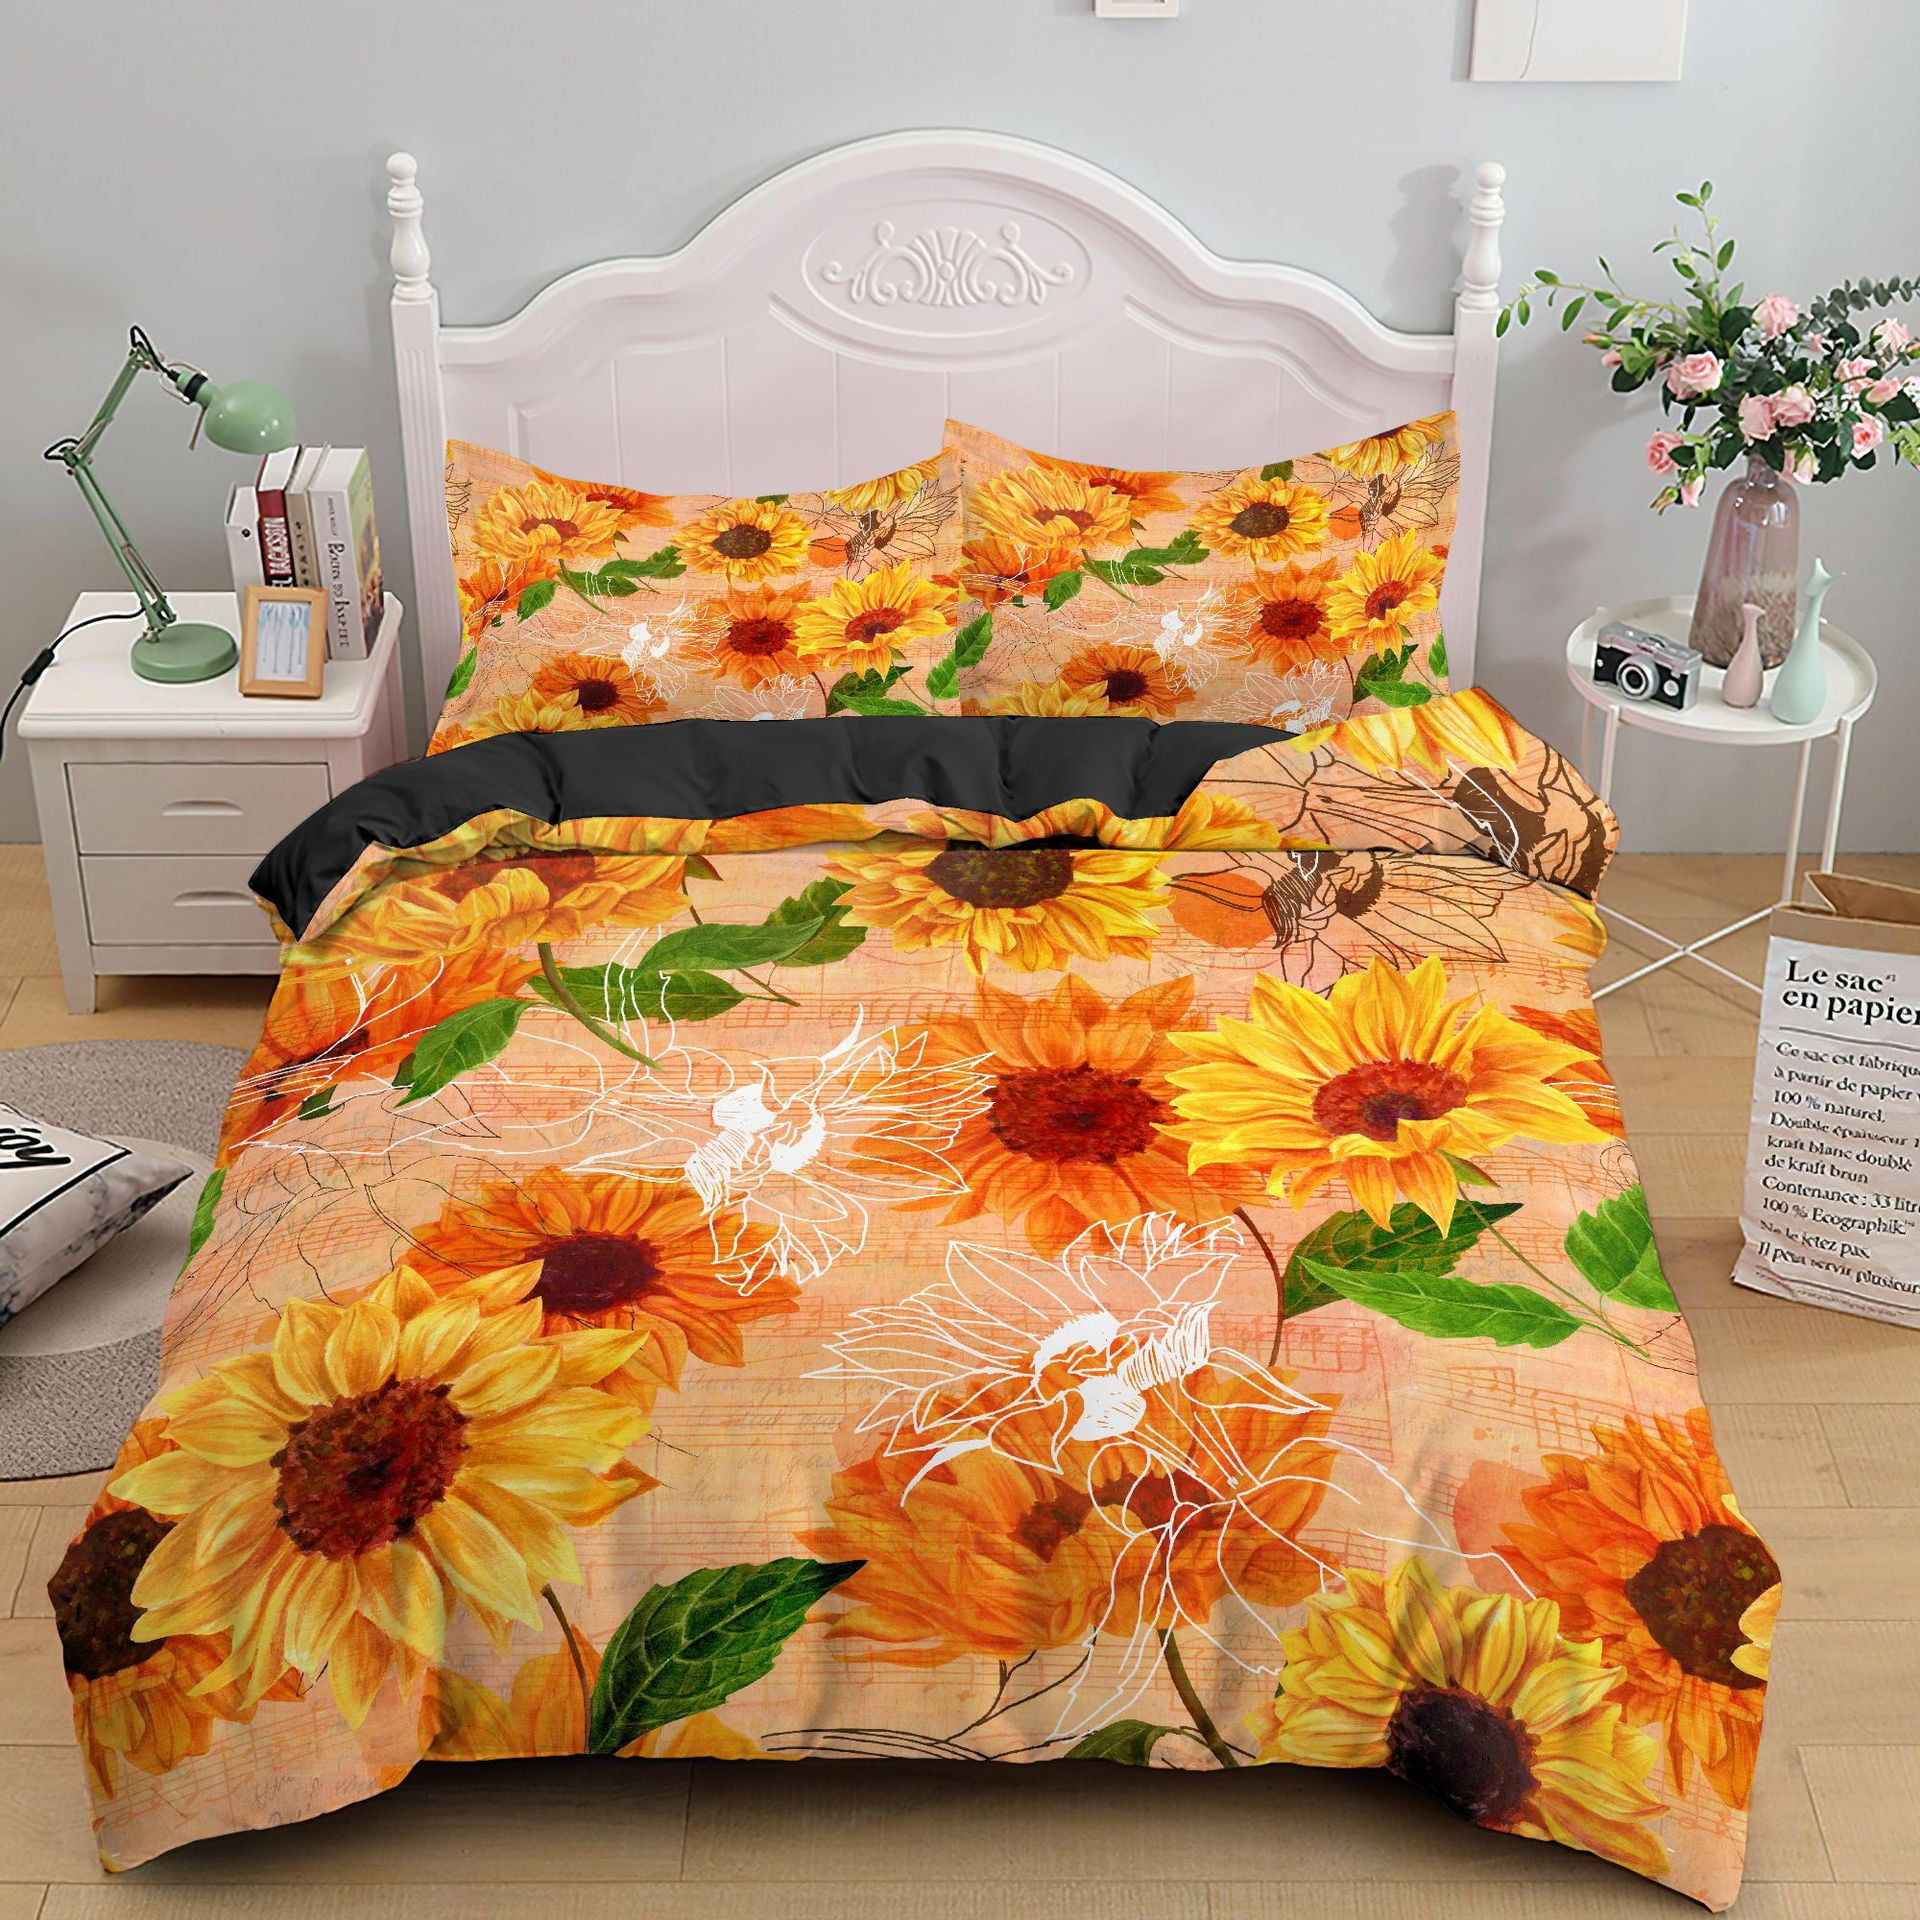 NTBED Black Sunflowers Comforter Set Yellow Floral Botanical 3-Pieces  Microfiber Bedding Quilt for Boys Girls Teens (Black, 